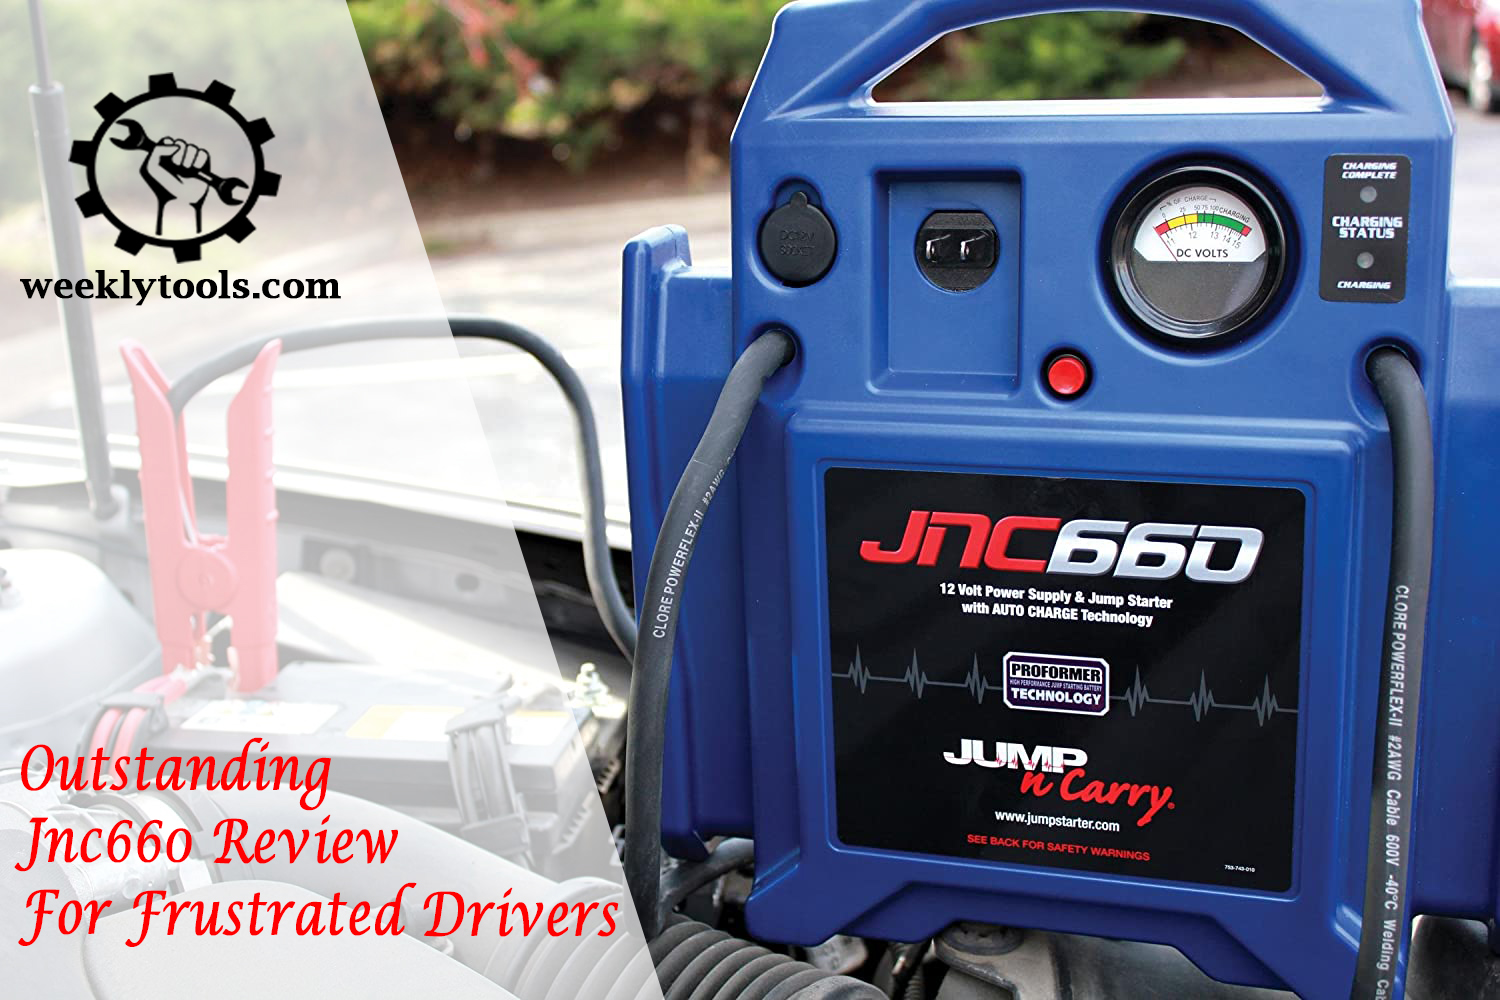 Outstanding Jnc660 Review For Frustrated Drivers